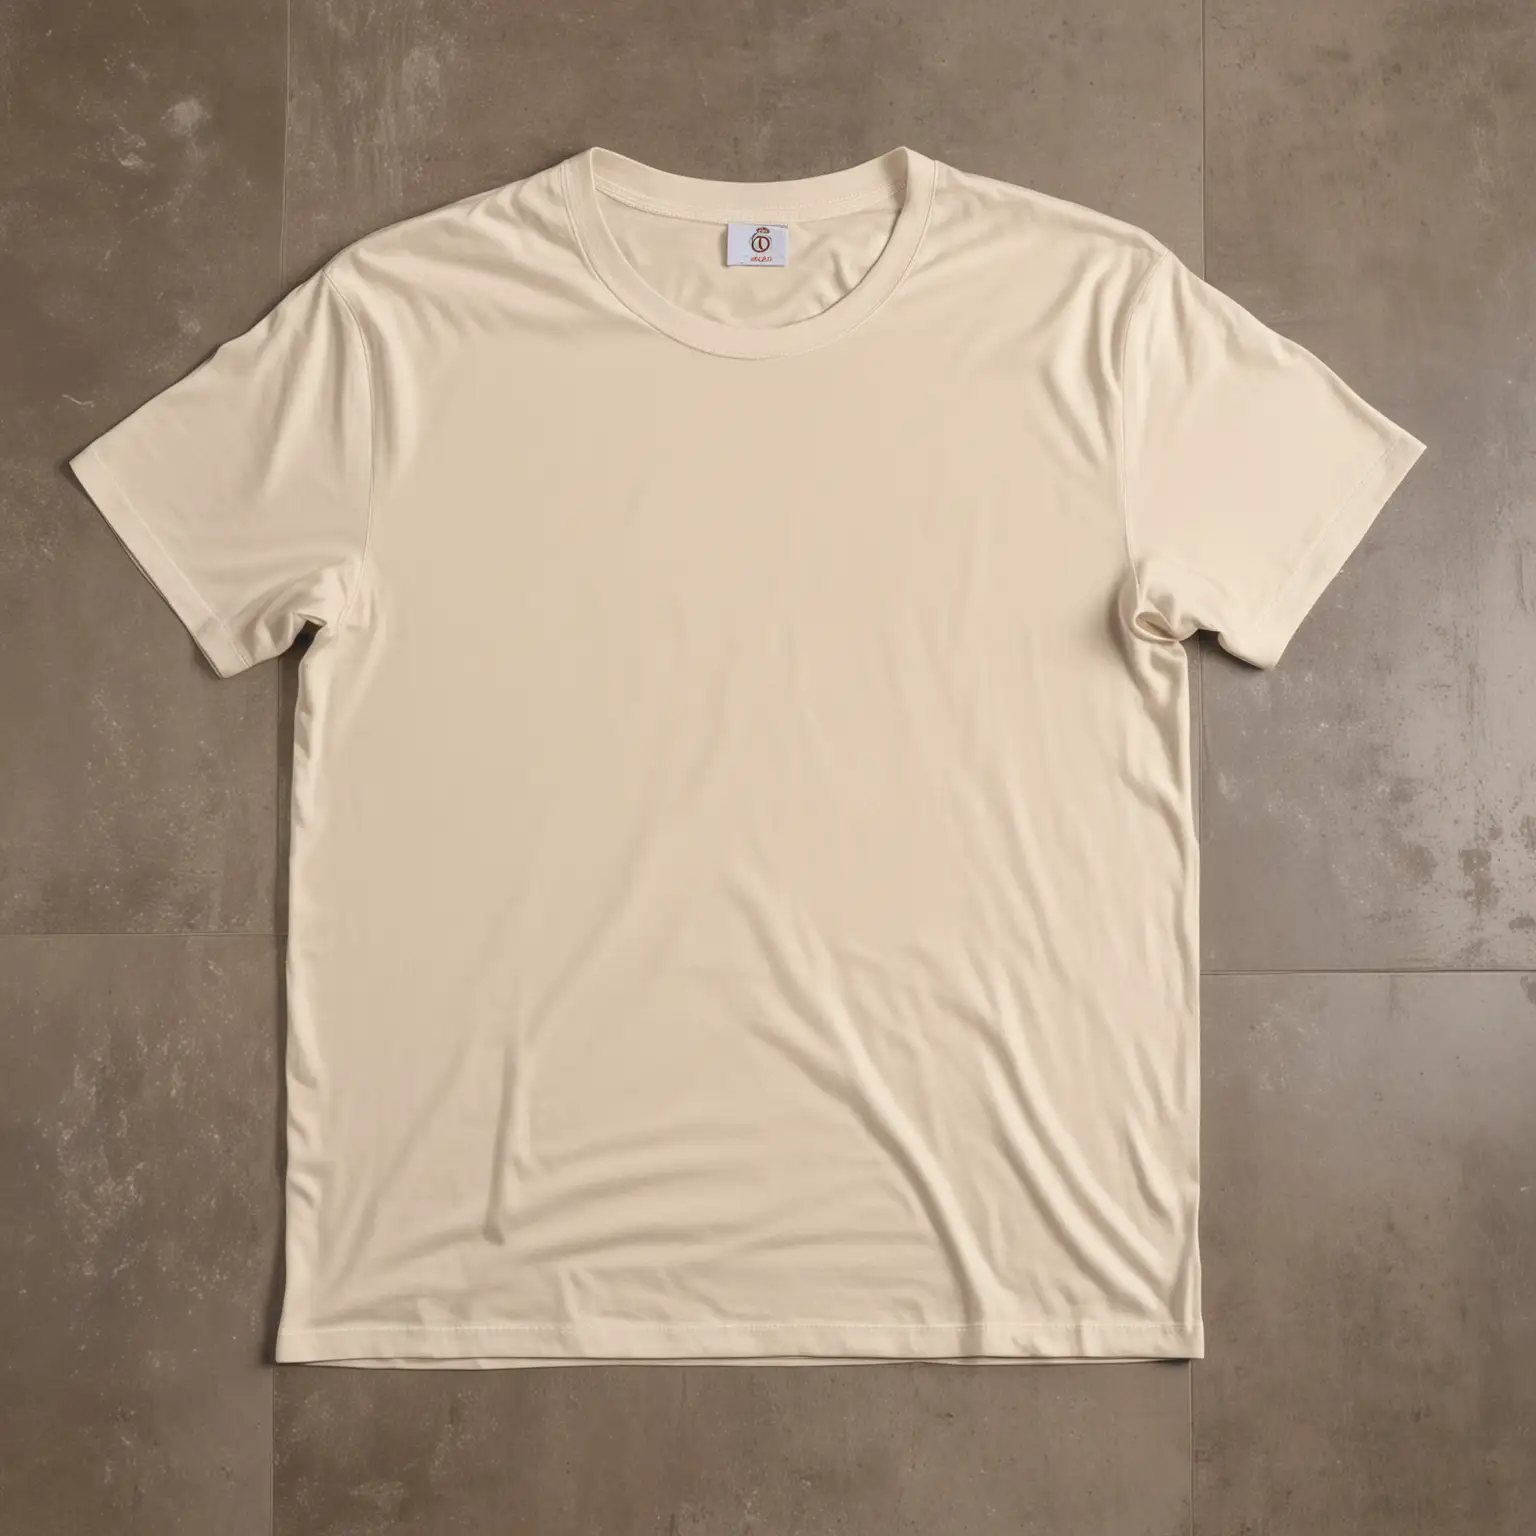 Hyper Realistic Natural TShirt Lying on Floor with Solid Contrasting Background